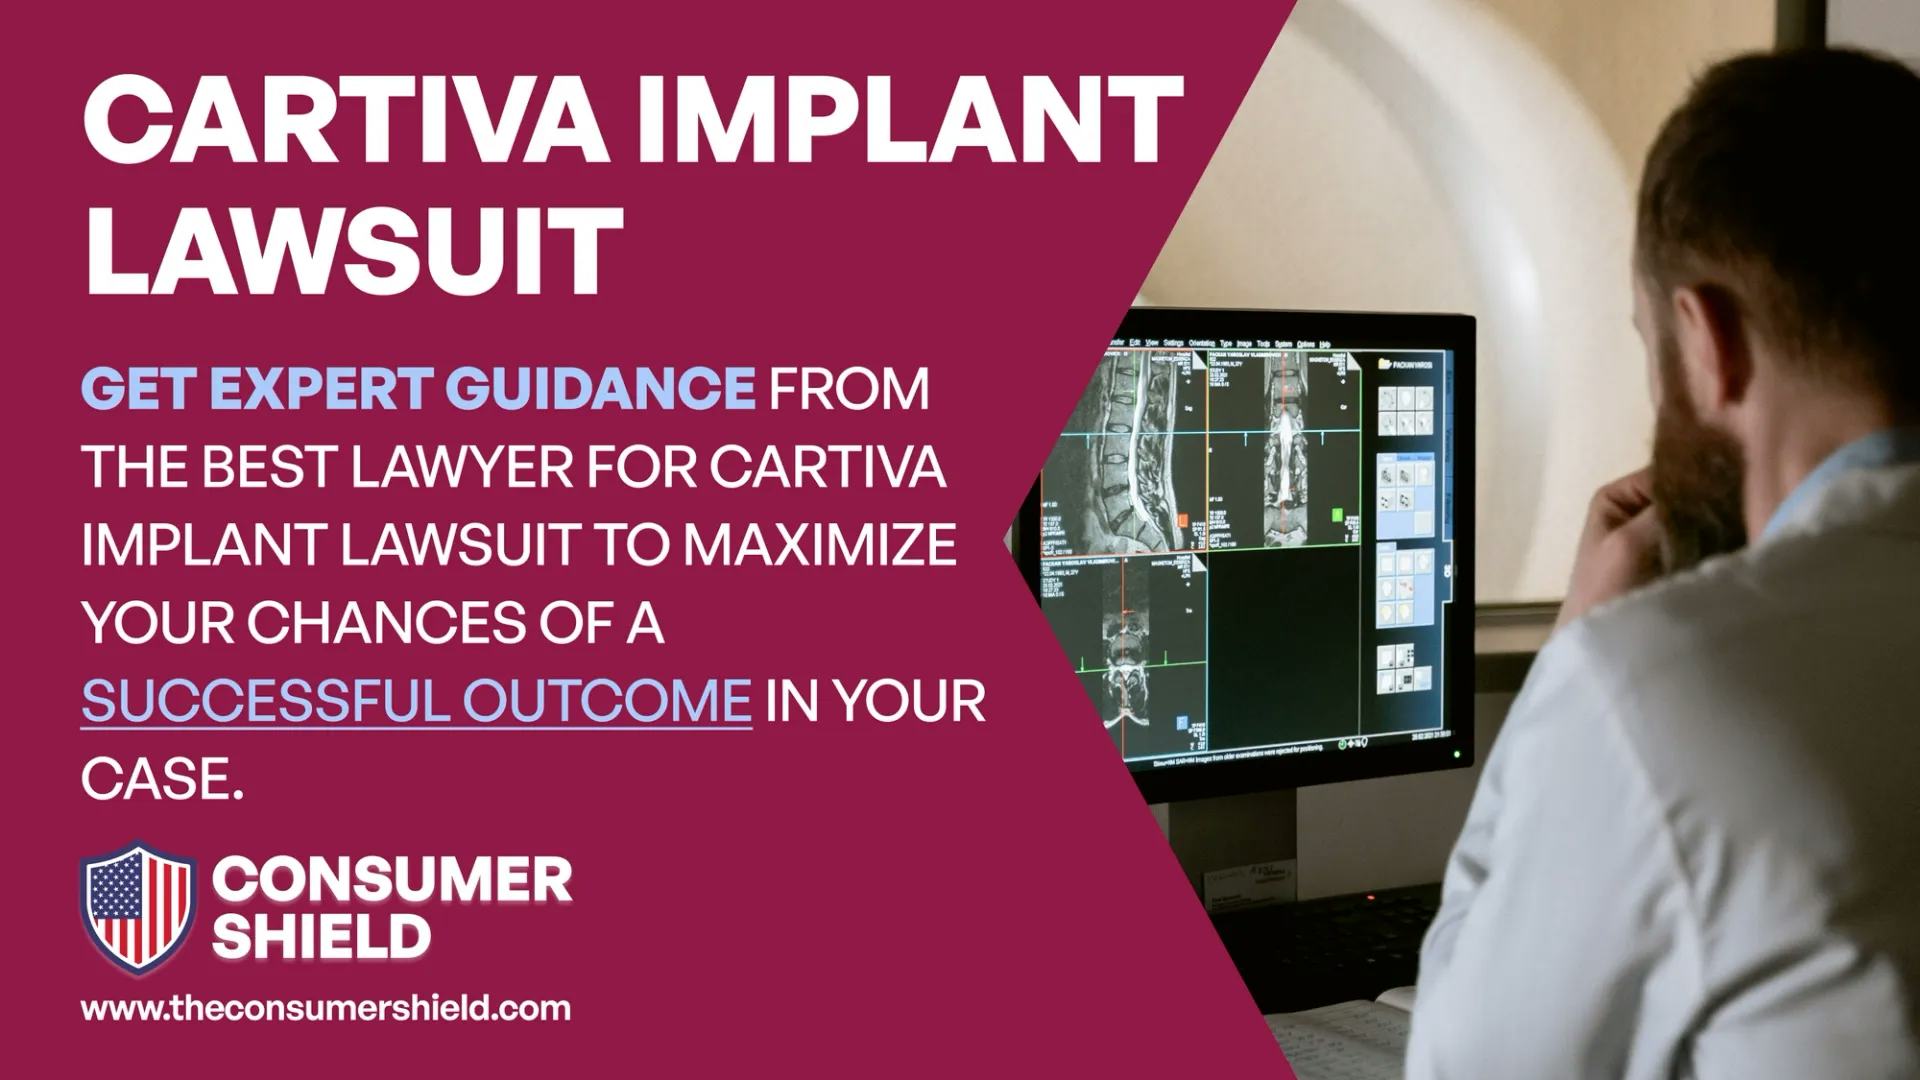 Do I Qualify for the Cartiva Implant Lawsuit?